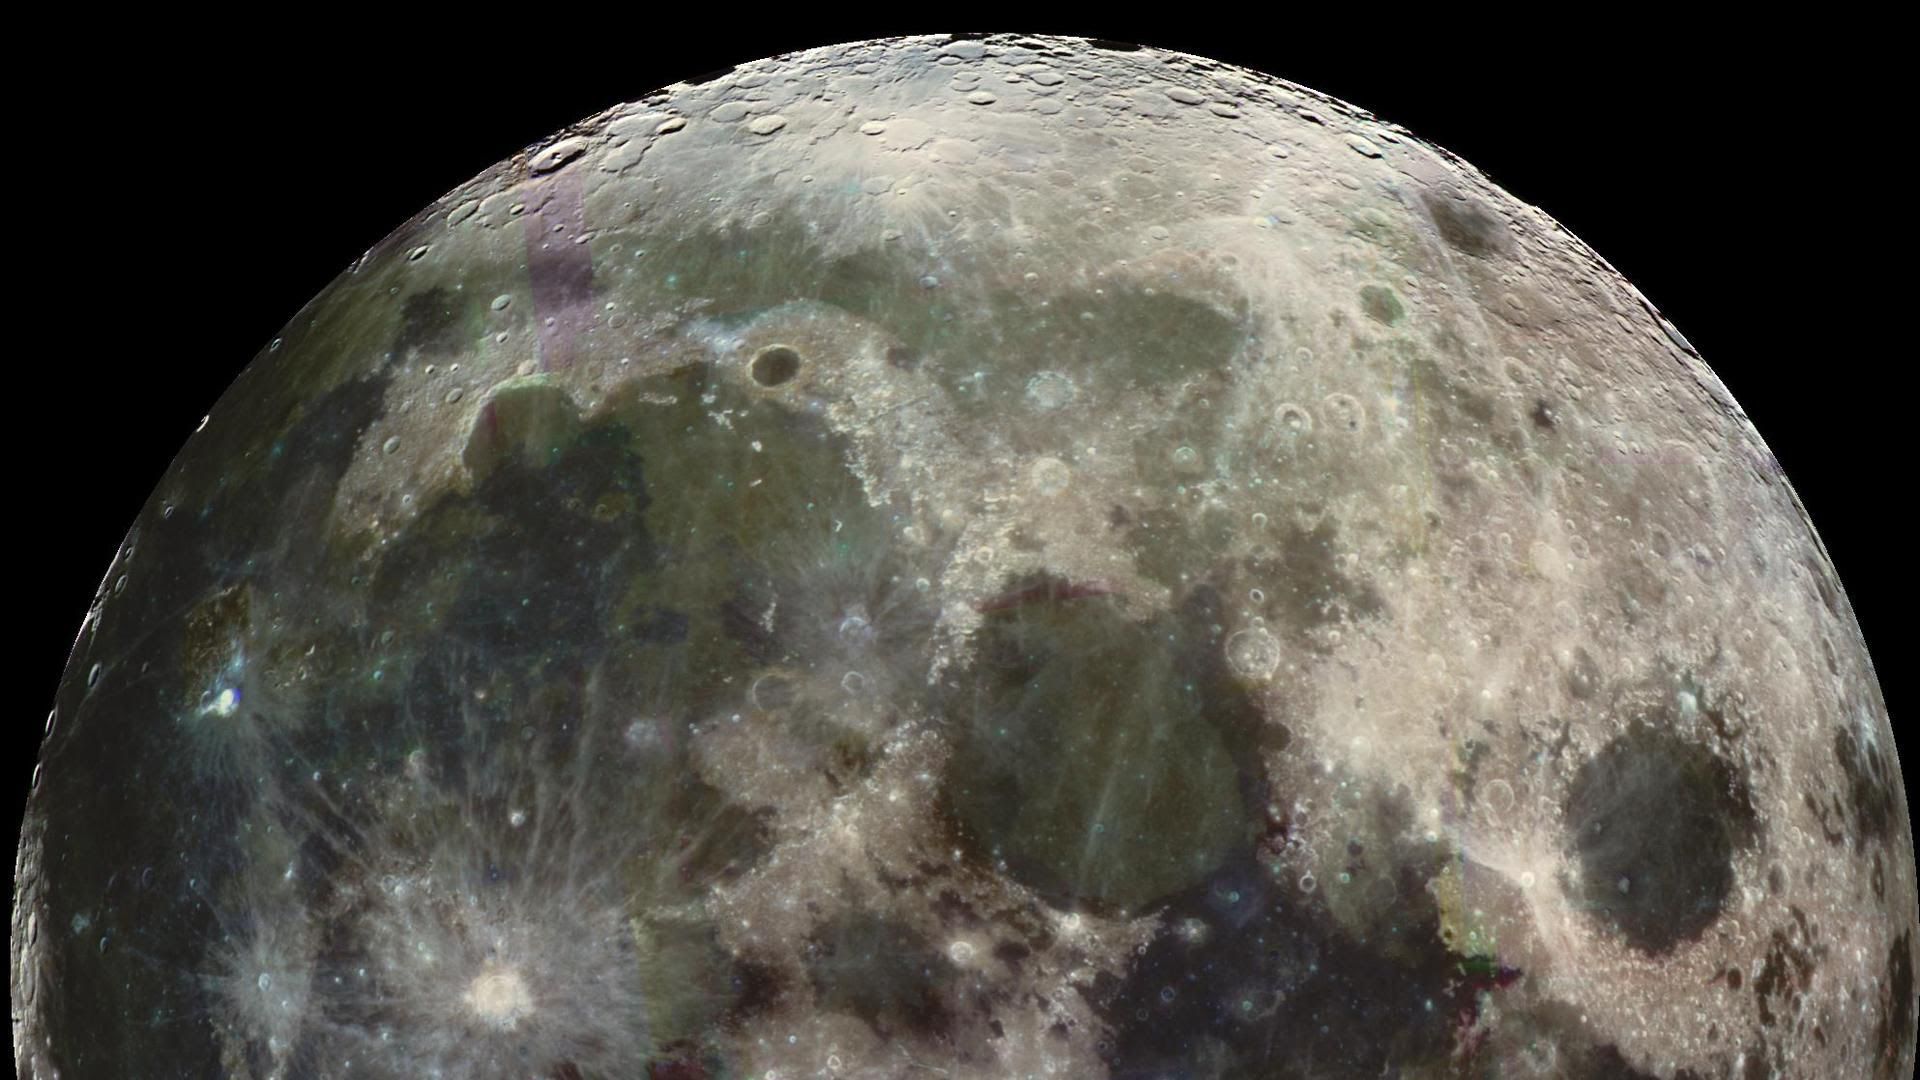 A satellite image of the moon